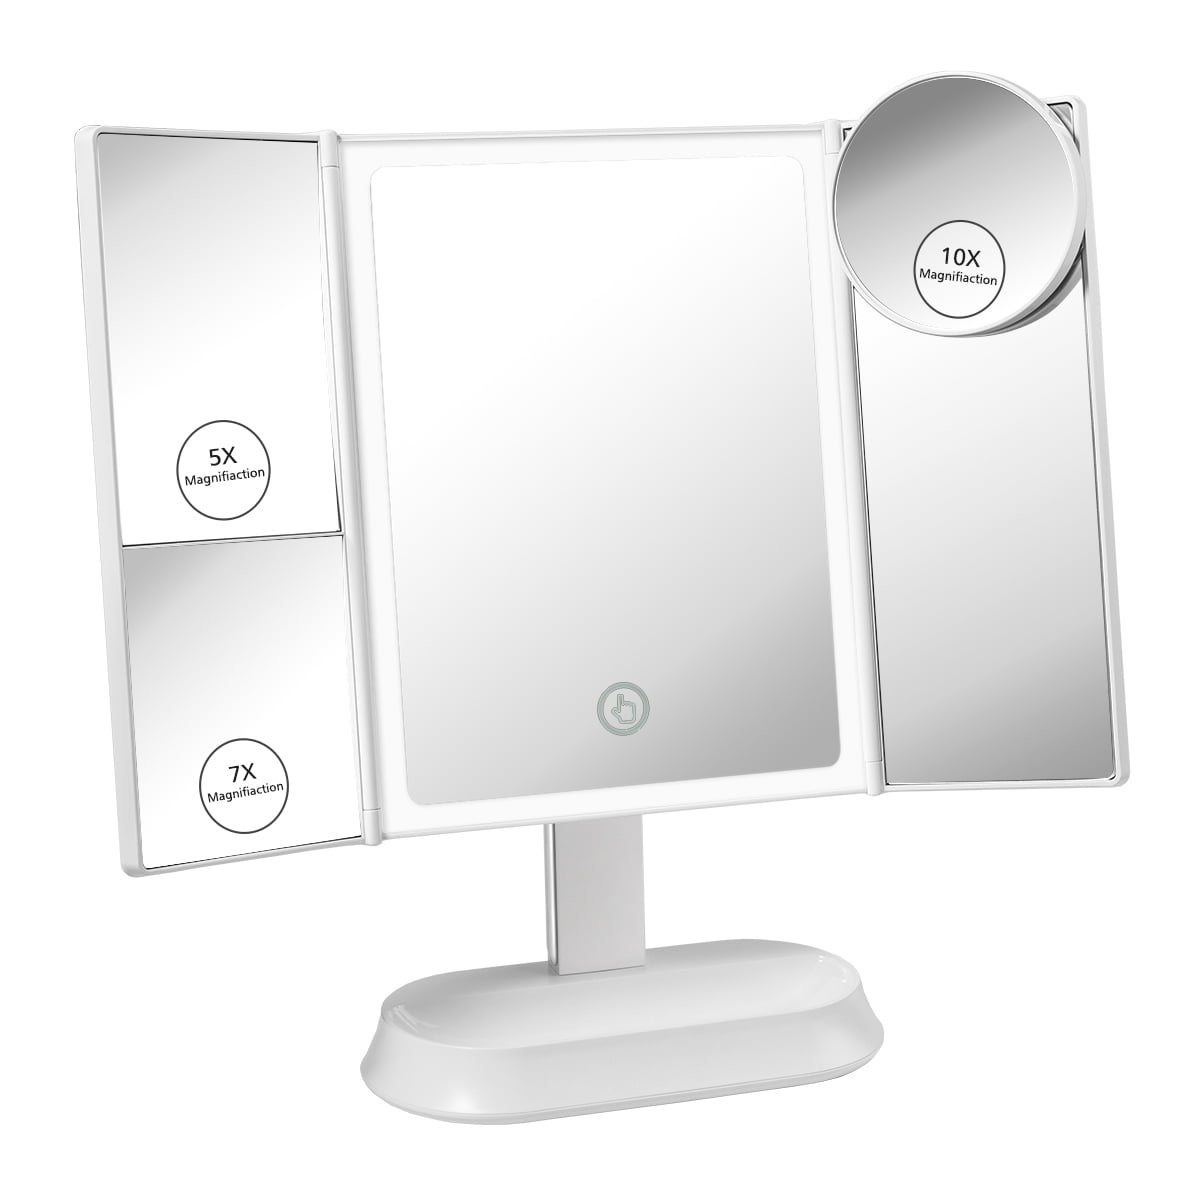 Makeup Vanity Mirror with 40 LED Lights, Trifold Mirror with Touch Screen  Dimming - 1x 5X 7X Magnification, with Detachable 10X Magnification, Portable  Cosmetic Lighted Makeup Mirror (White) - Walmart.com